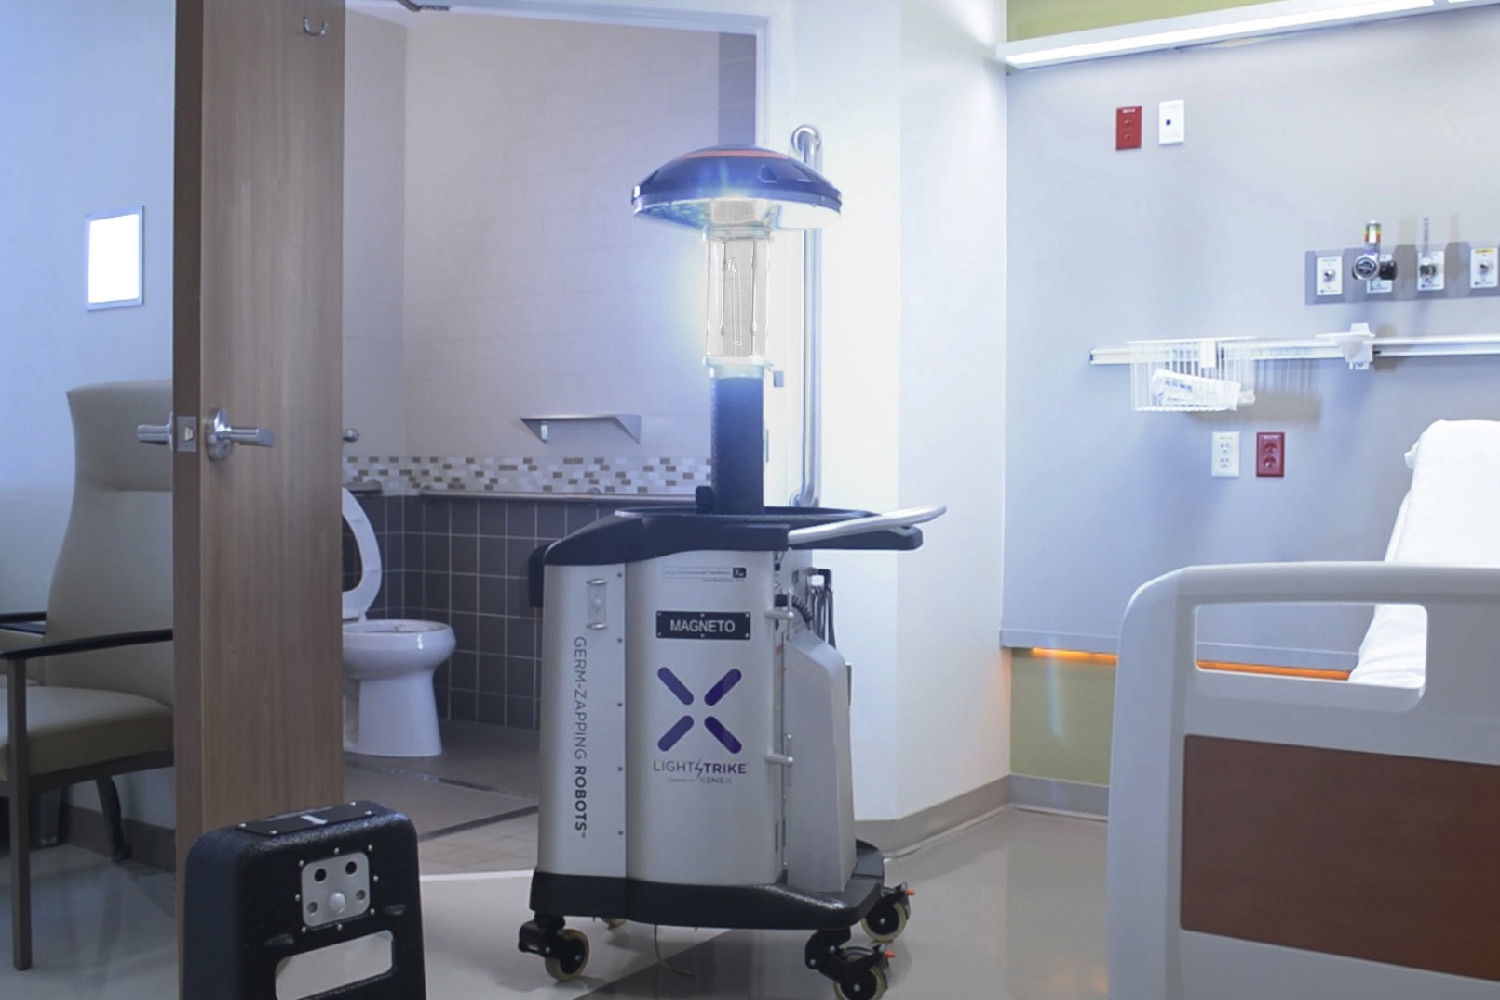 superbug zapping robot new jersey lightstrike in patient room with bathroom